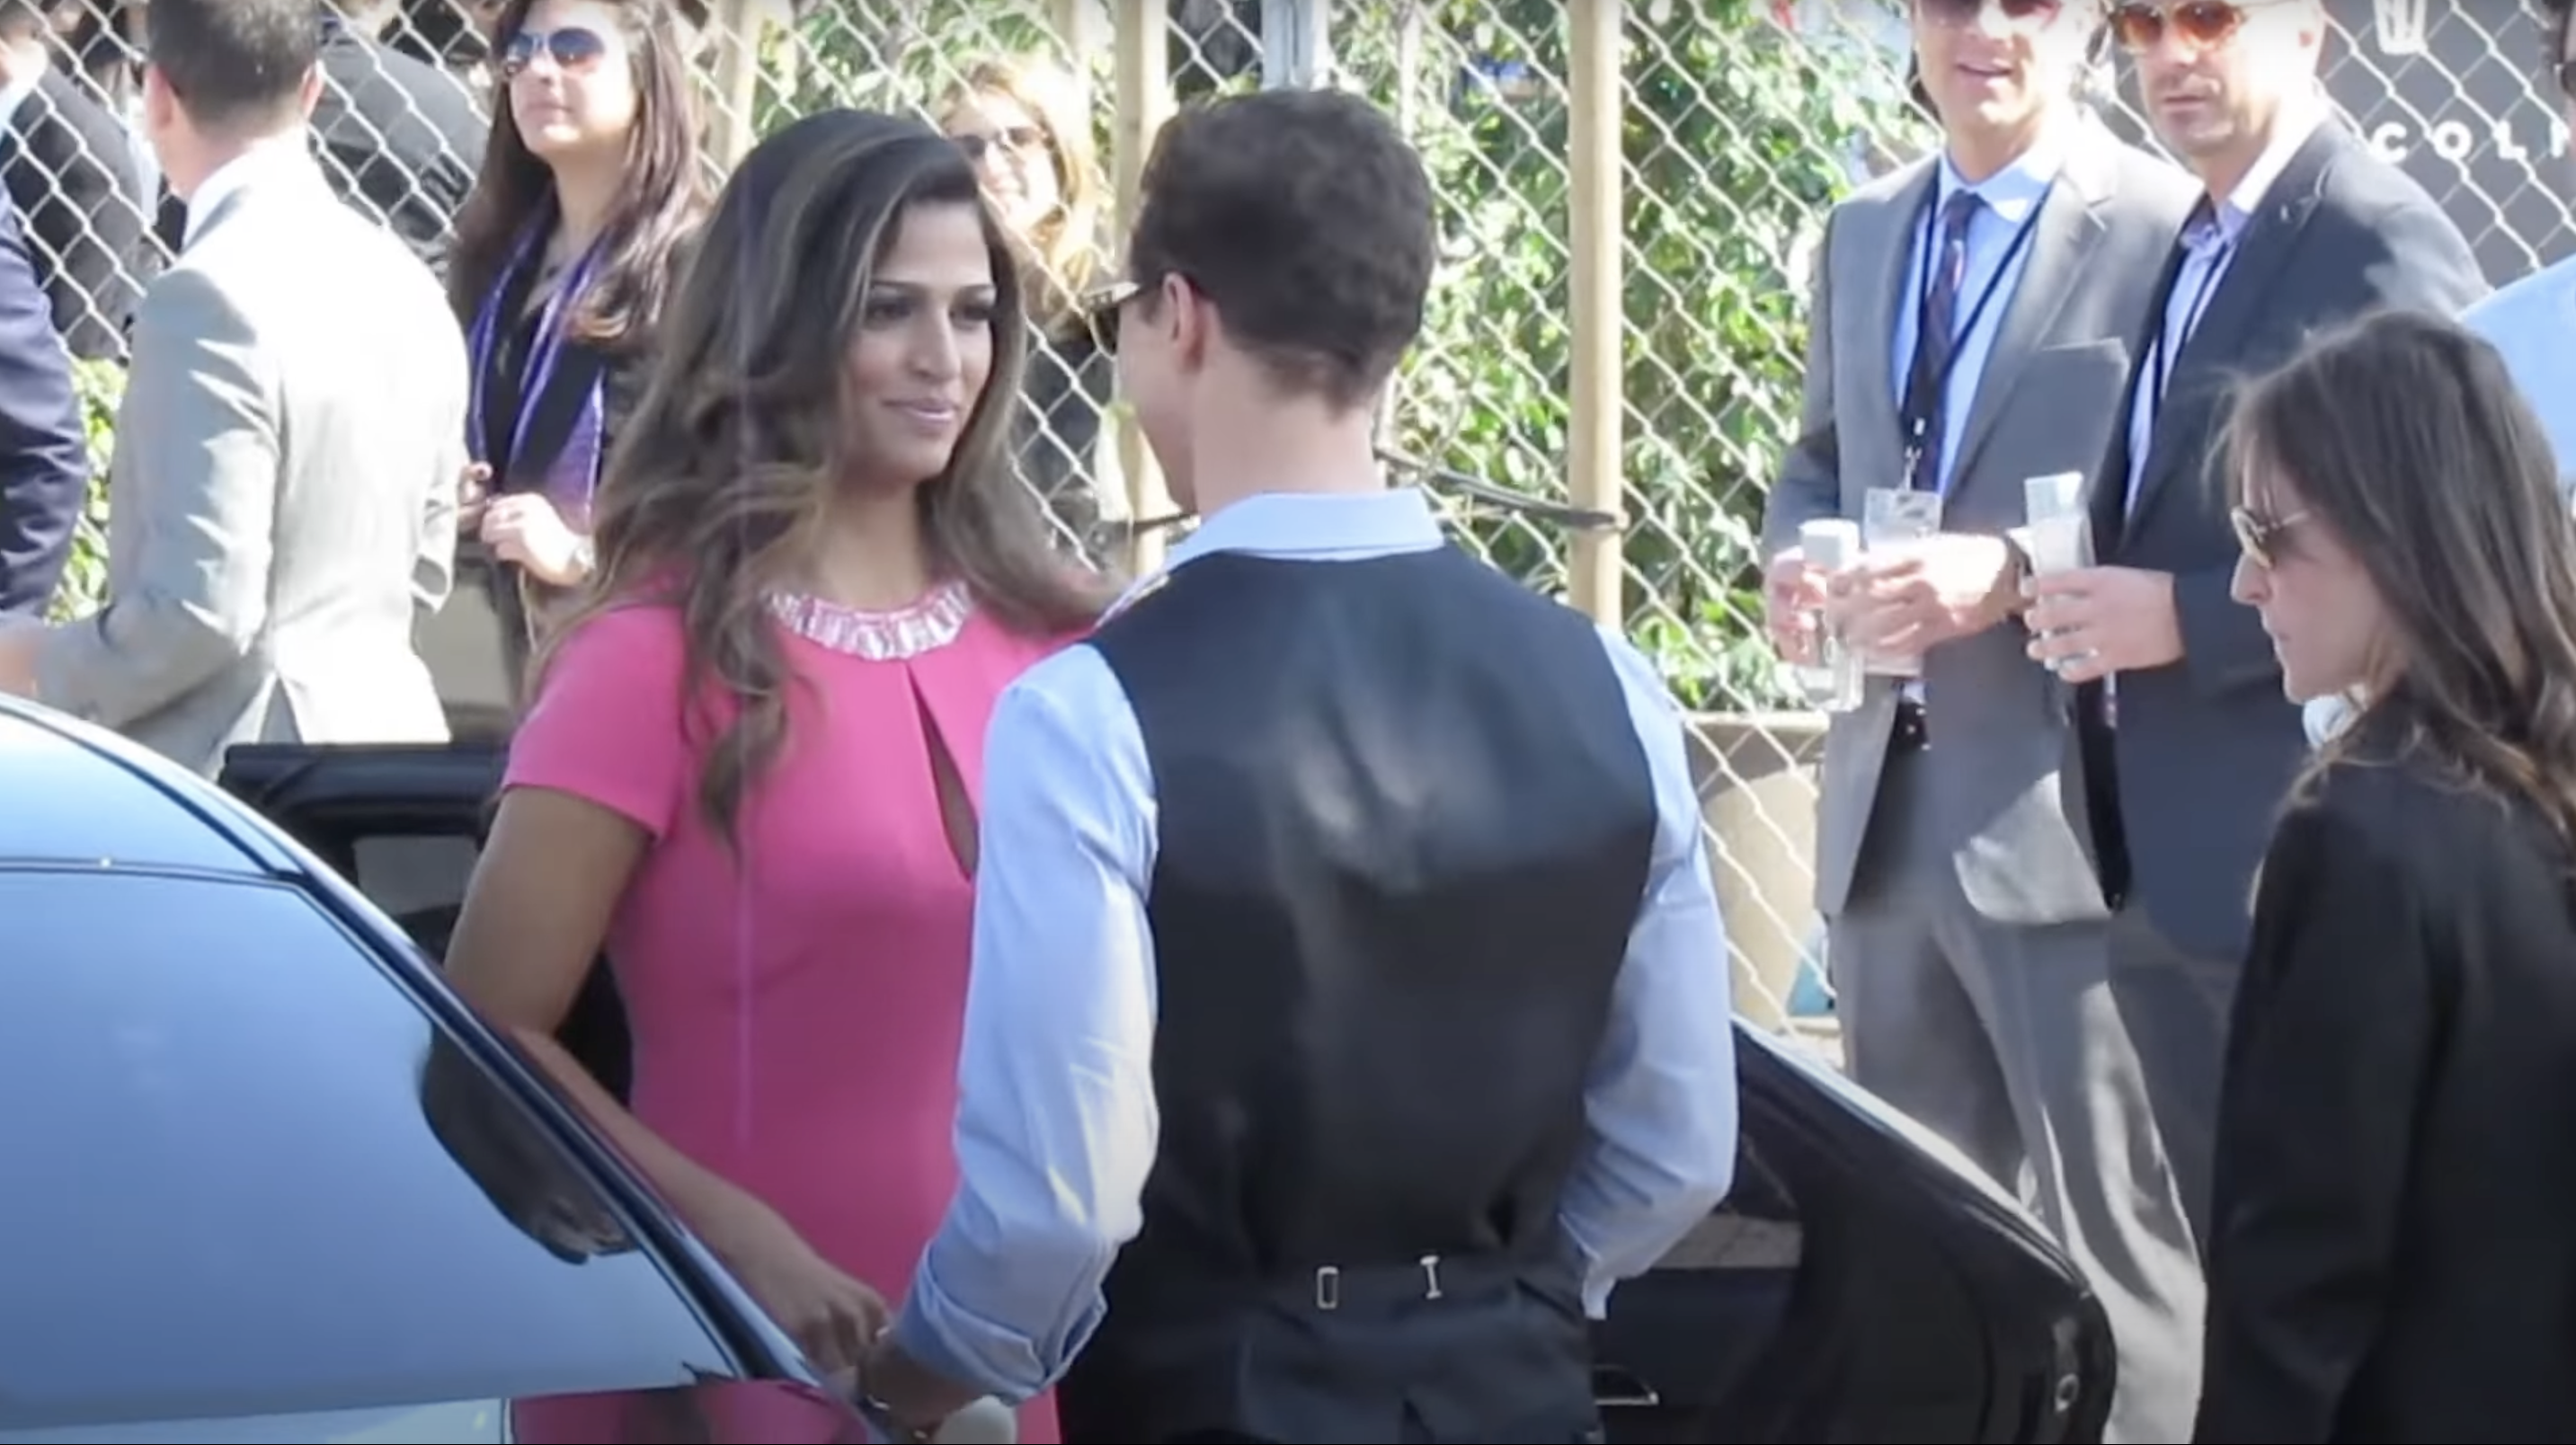 Camila Alves and Matthew McConaughey look at each other upon arriving at an event | Source: youtube.com/Celebrity WotNot